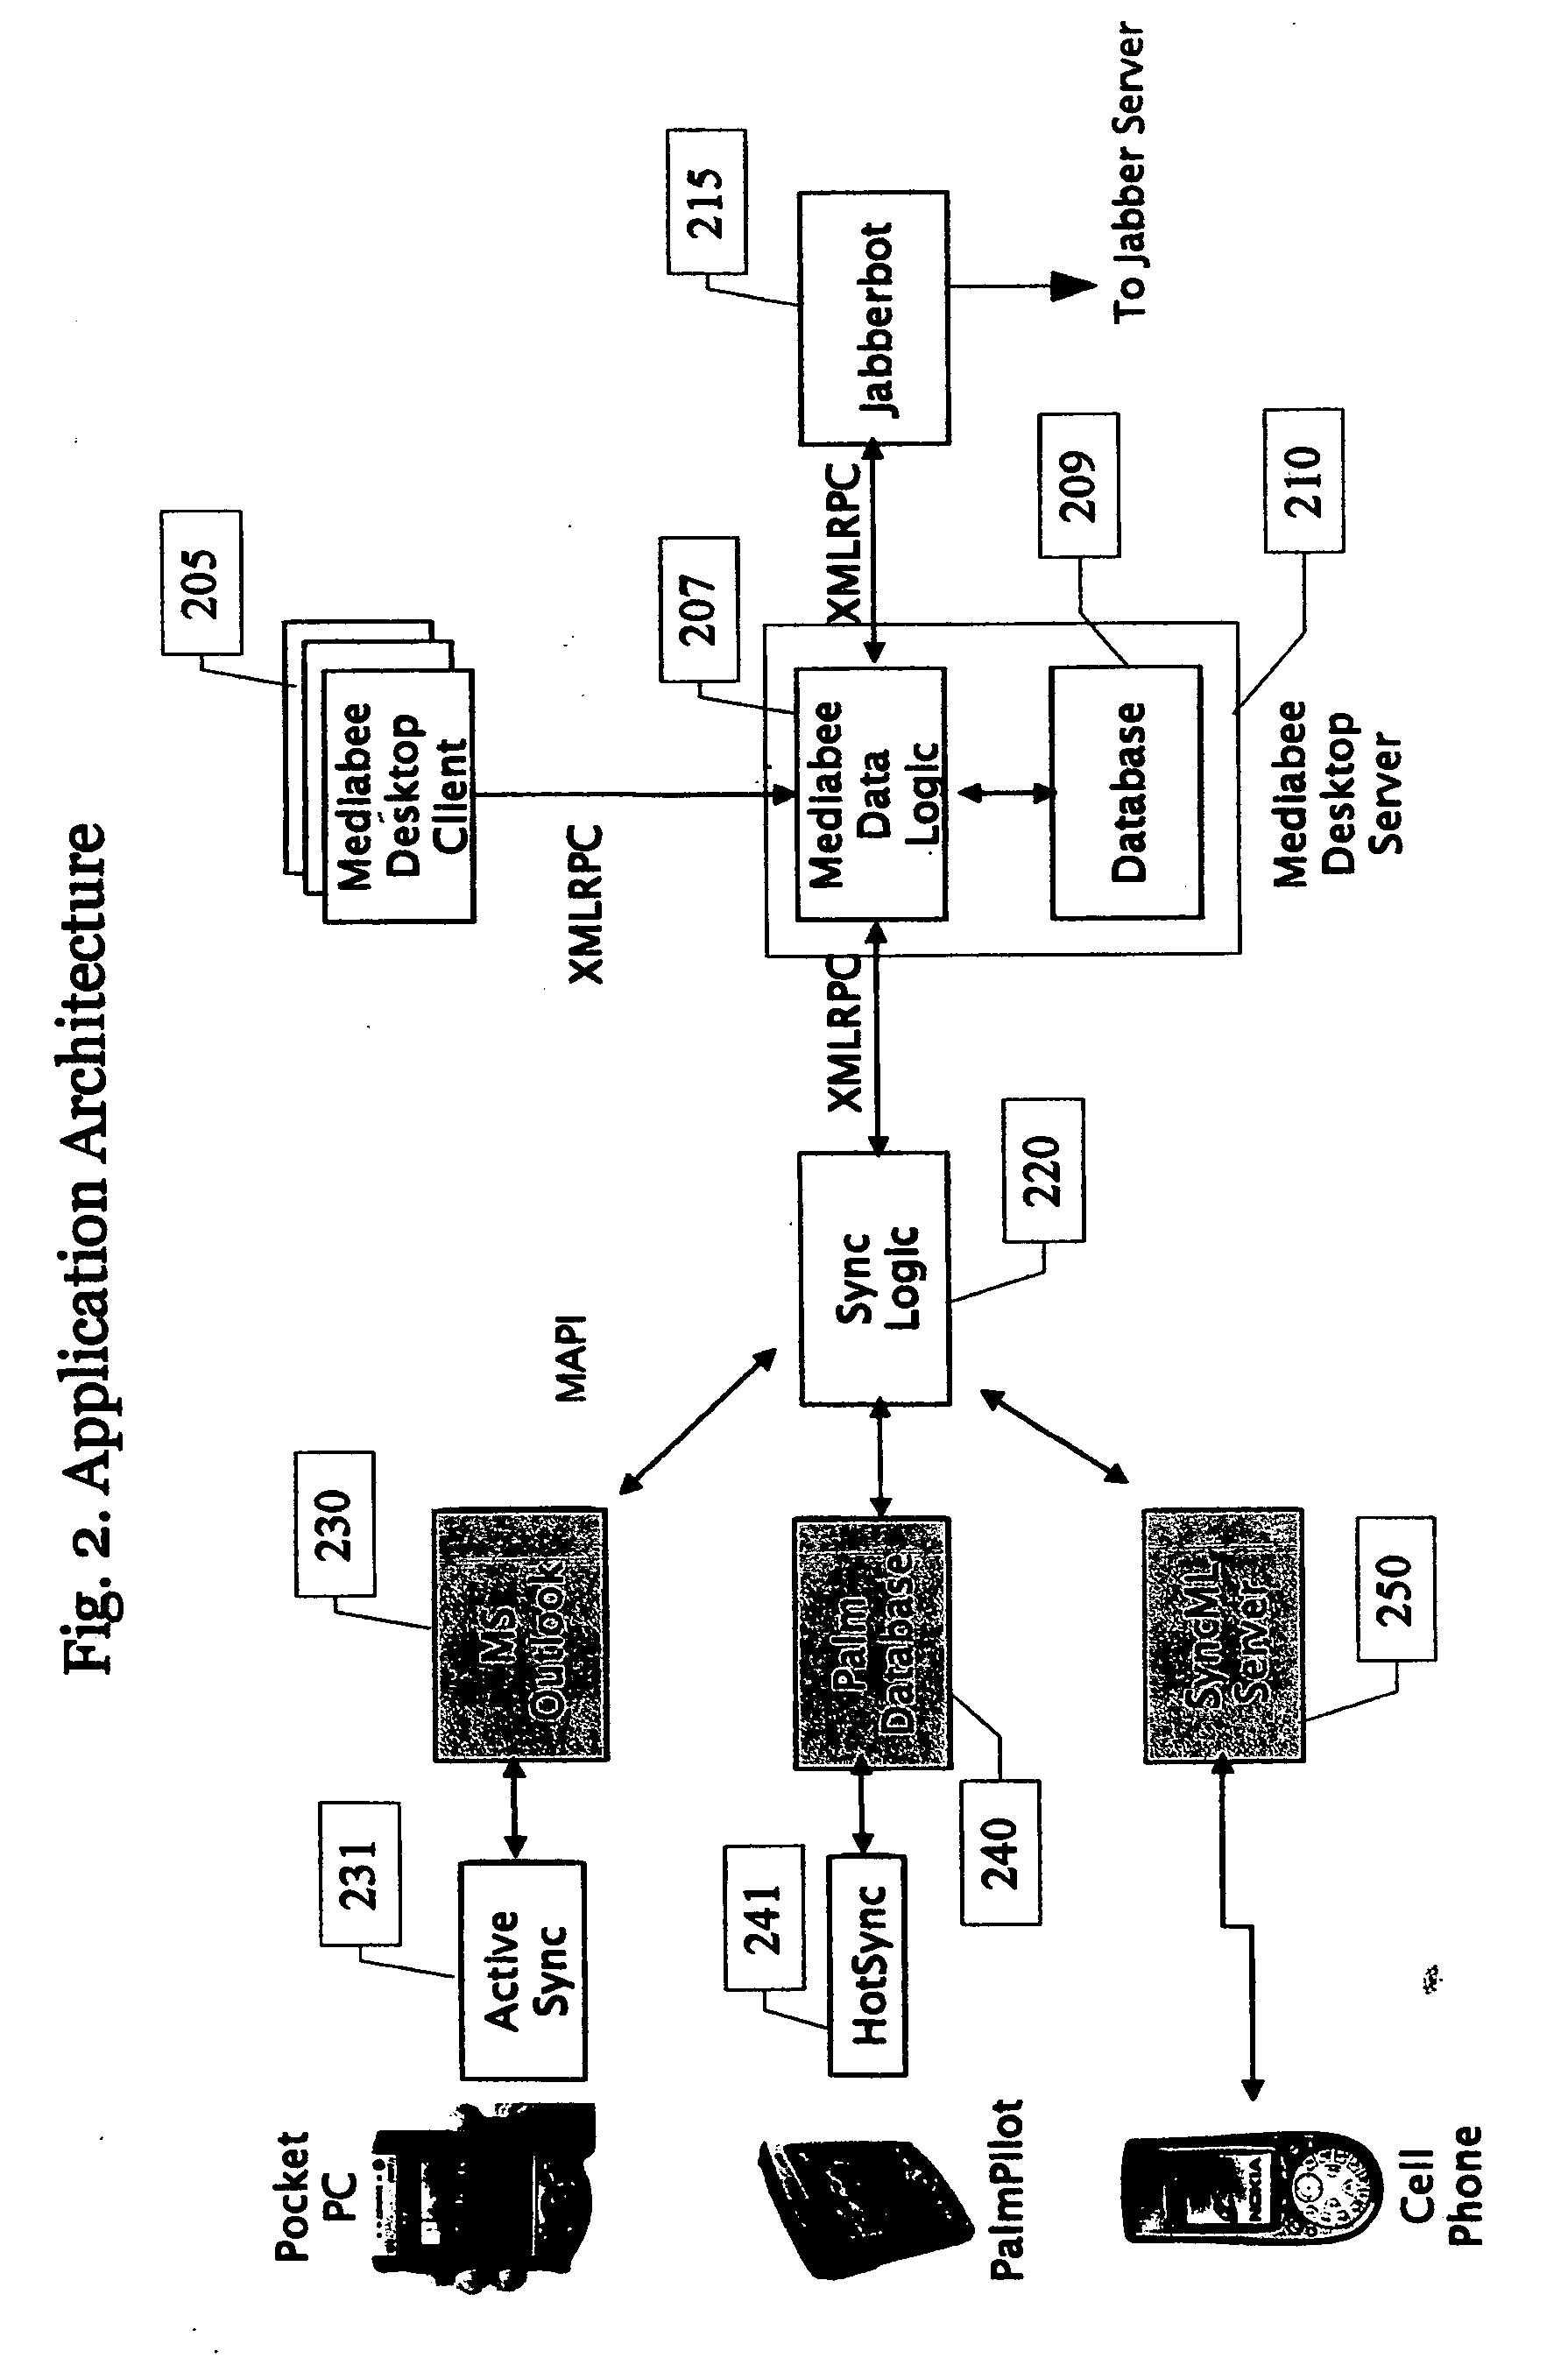 System and method for information management